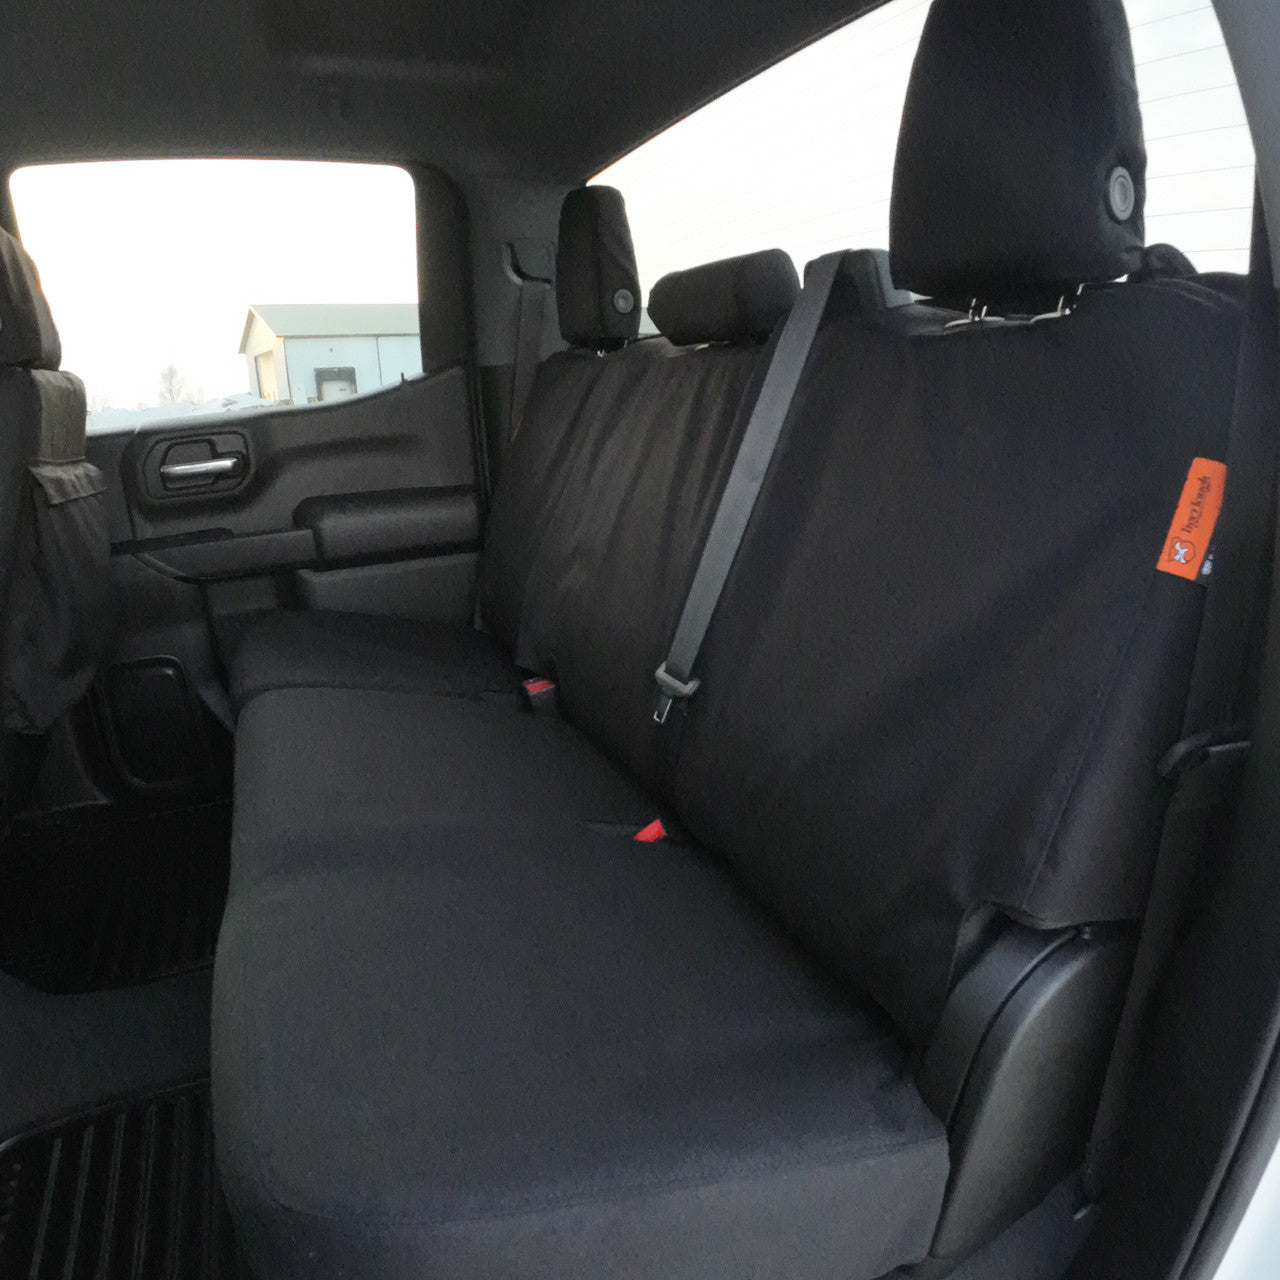 Rear Seat Covers for Chevy & GMC Trucks (65515)